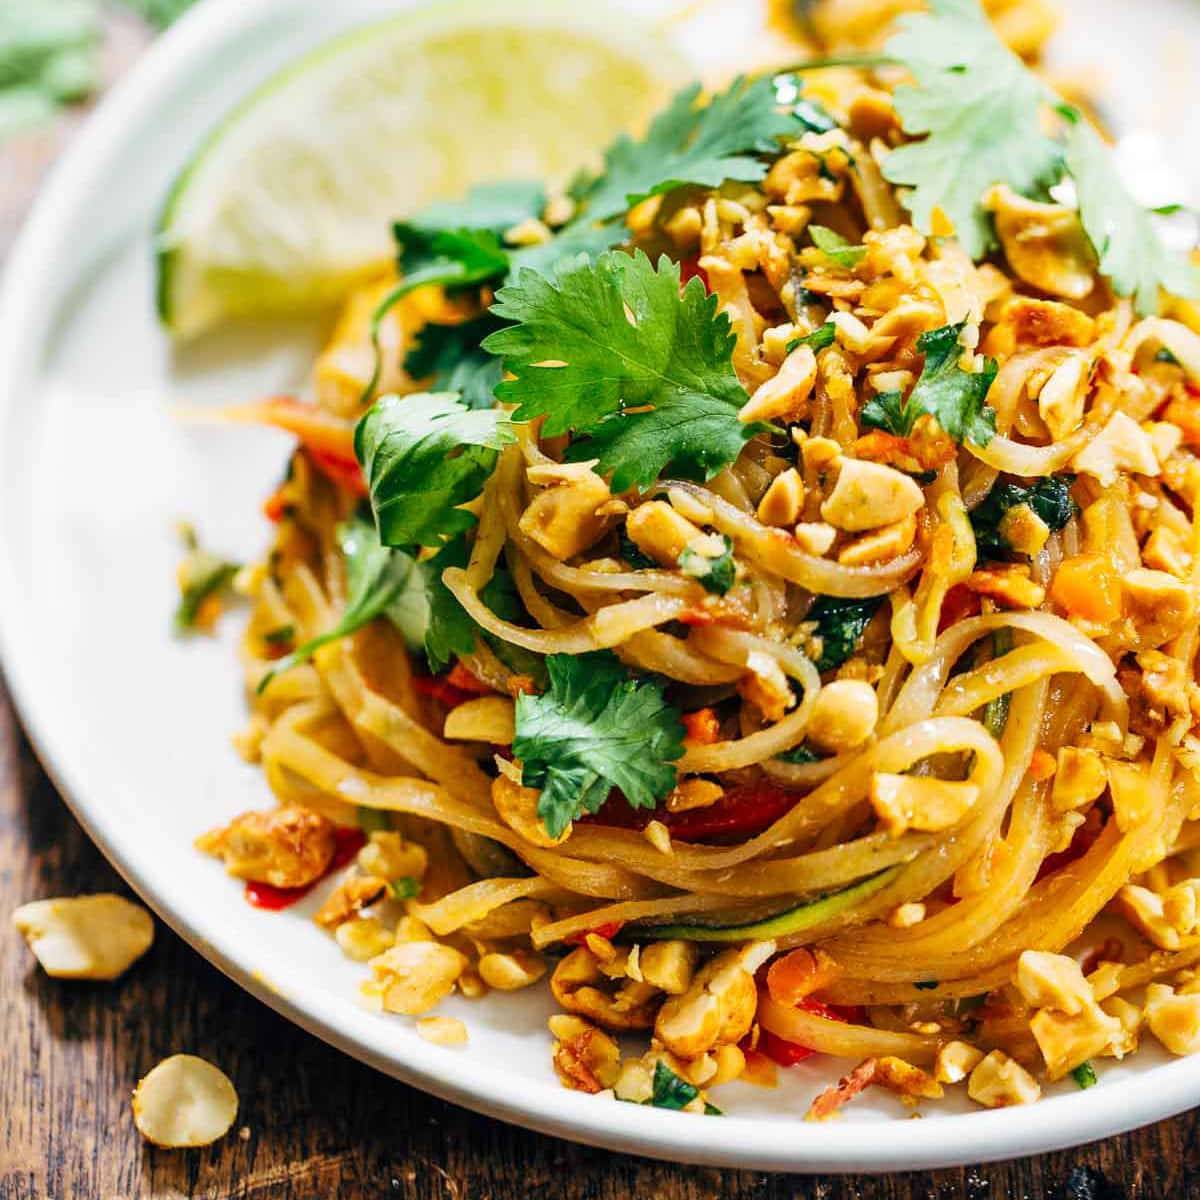 What Vegetables Go In Pad Thai